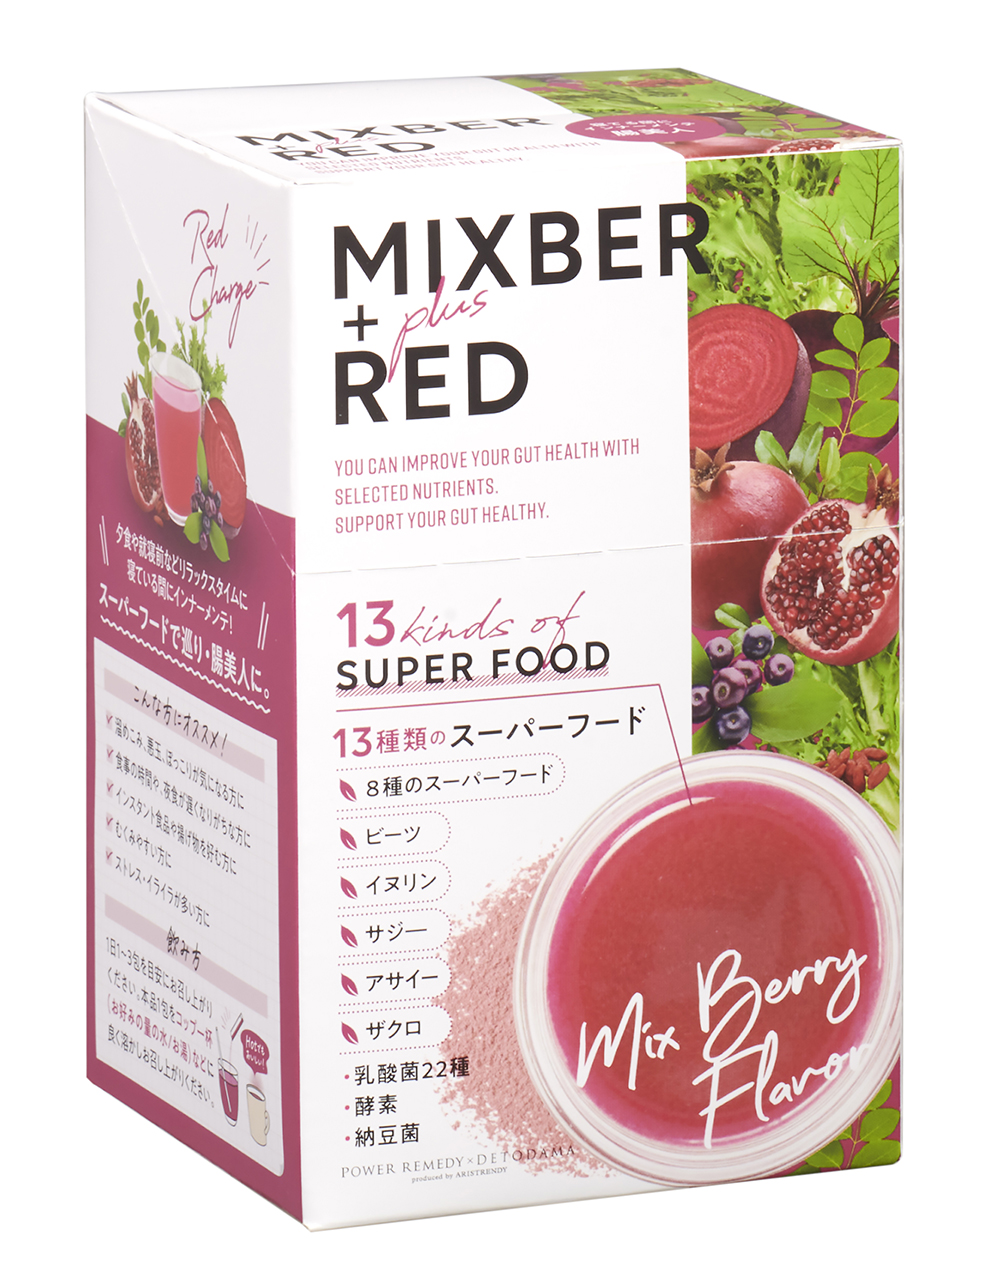 MIXBER ＋plus RED(ﾚｯﾄﾞ)【店】飲むサラダ